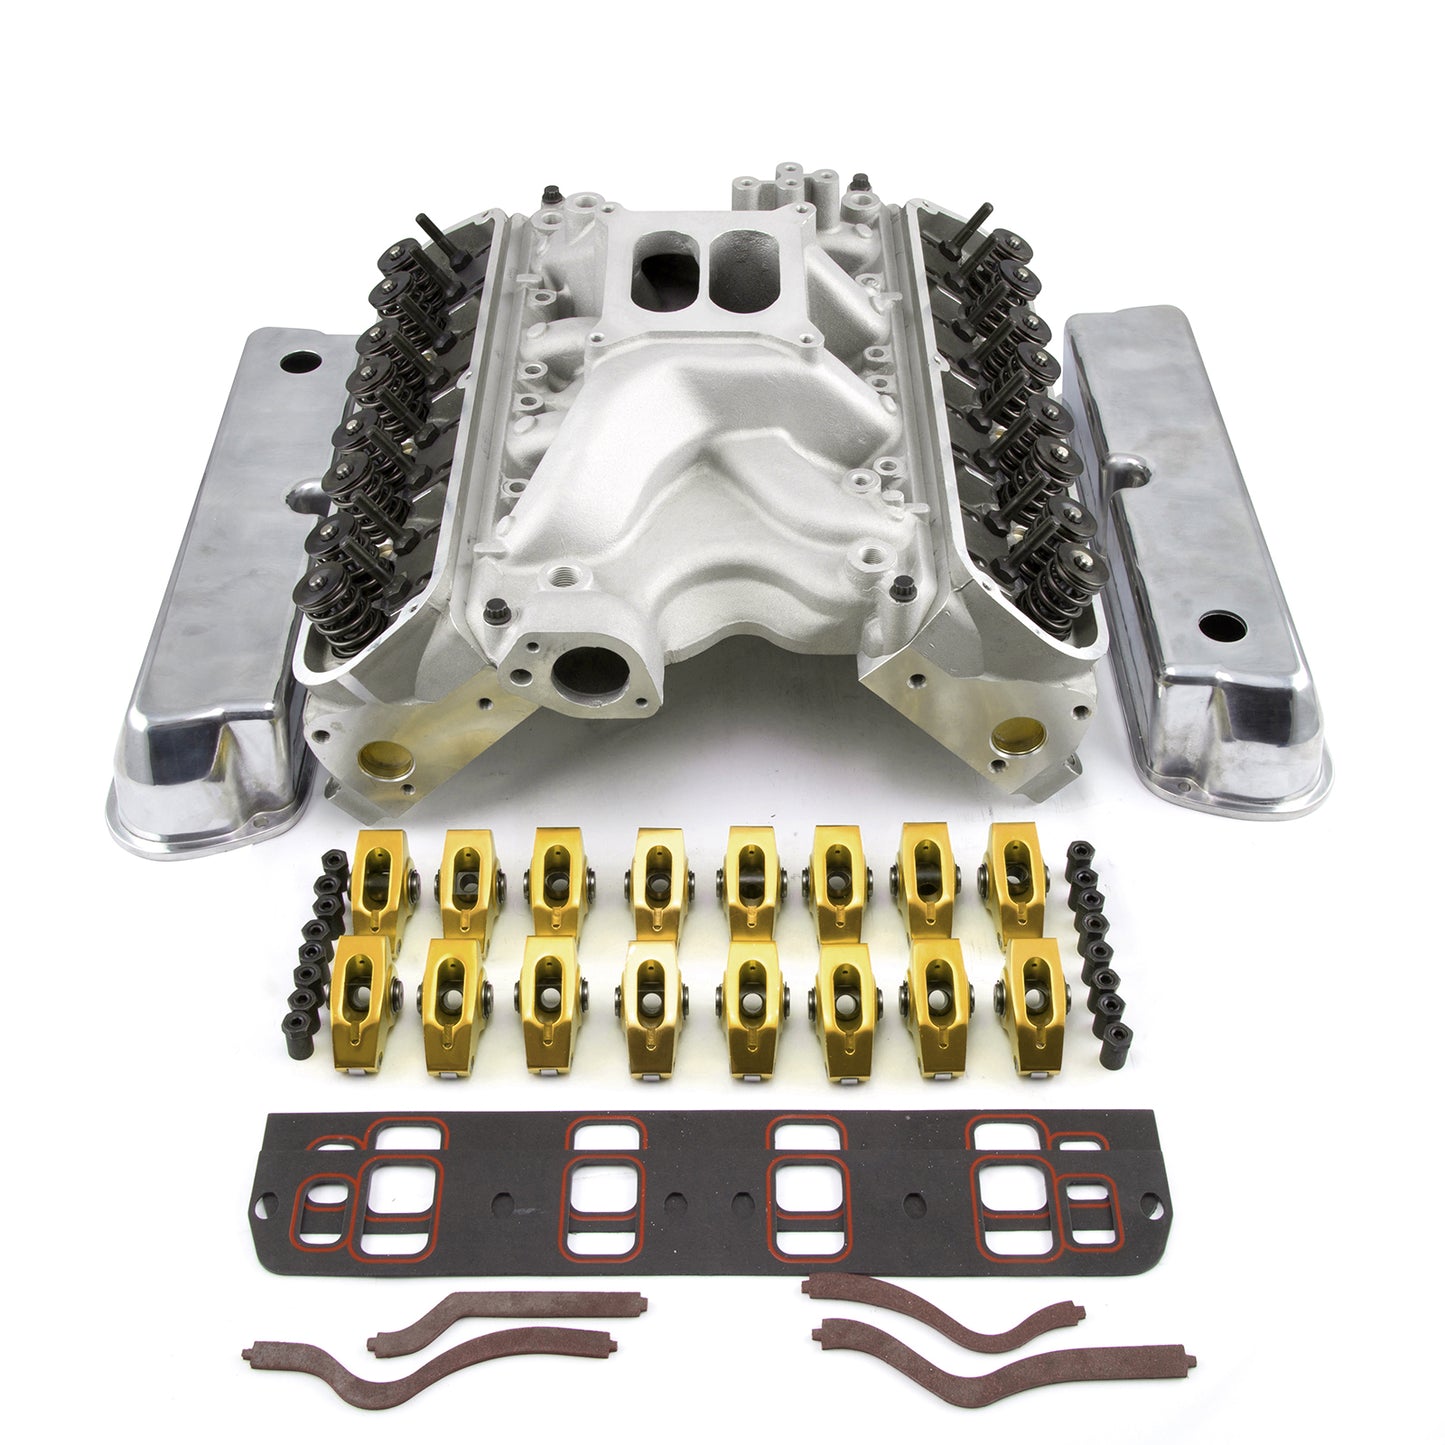 Speedmaster PCE435.1034 Fits Ford 351W Windsor Hyd FT 210cc Cylinder Head Top End Engine Combo Kit